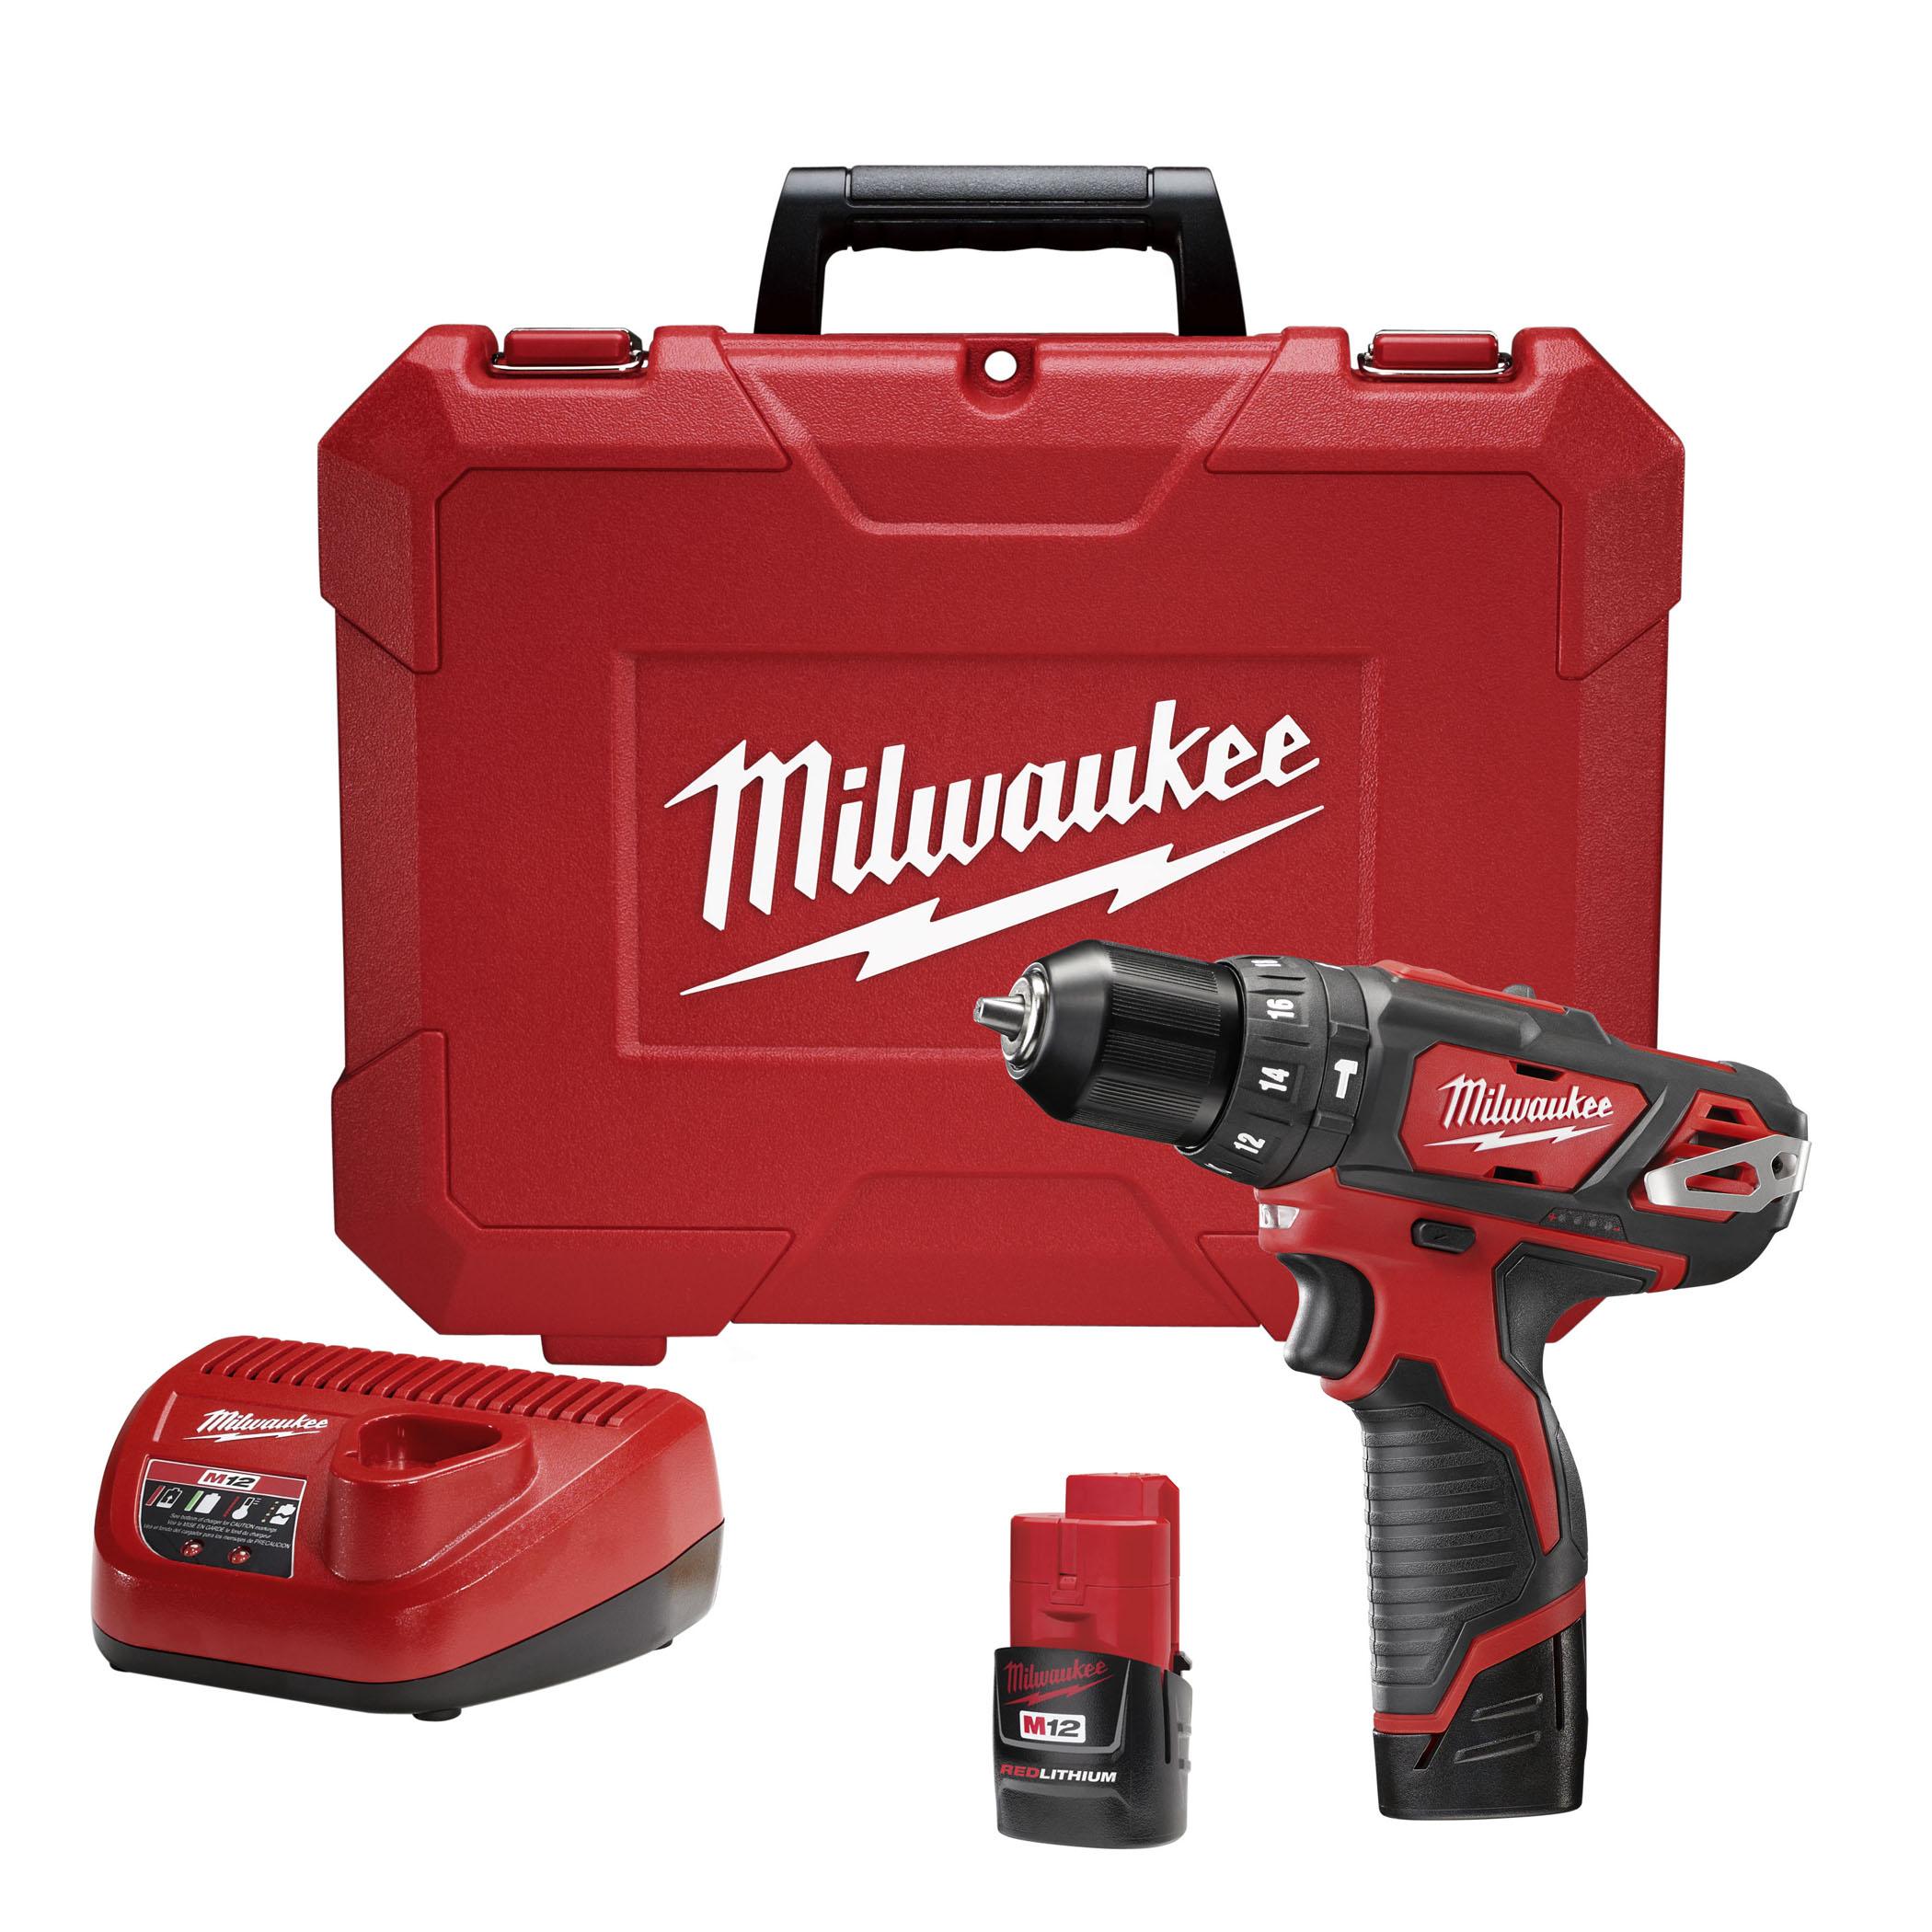 M12 12 Volt Lithium-Ion Cordless 3/8 in. Hammer Drill/Driver Kit